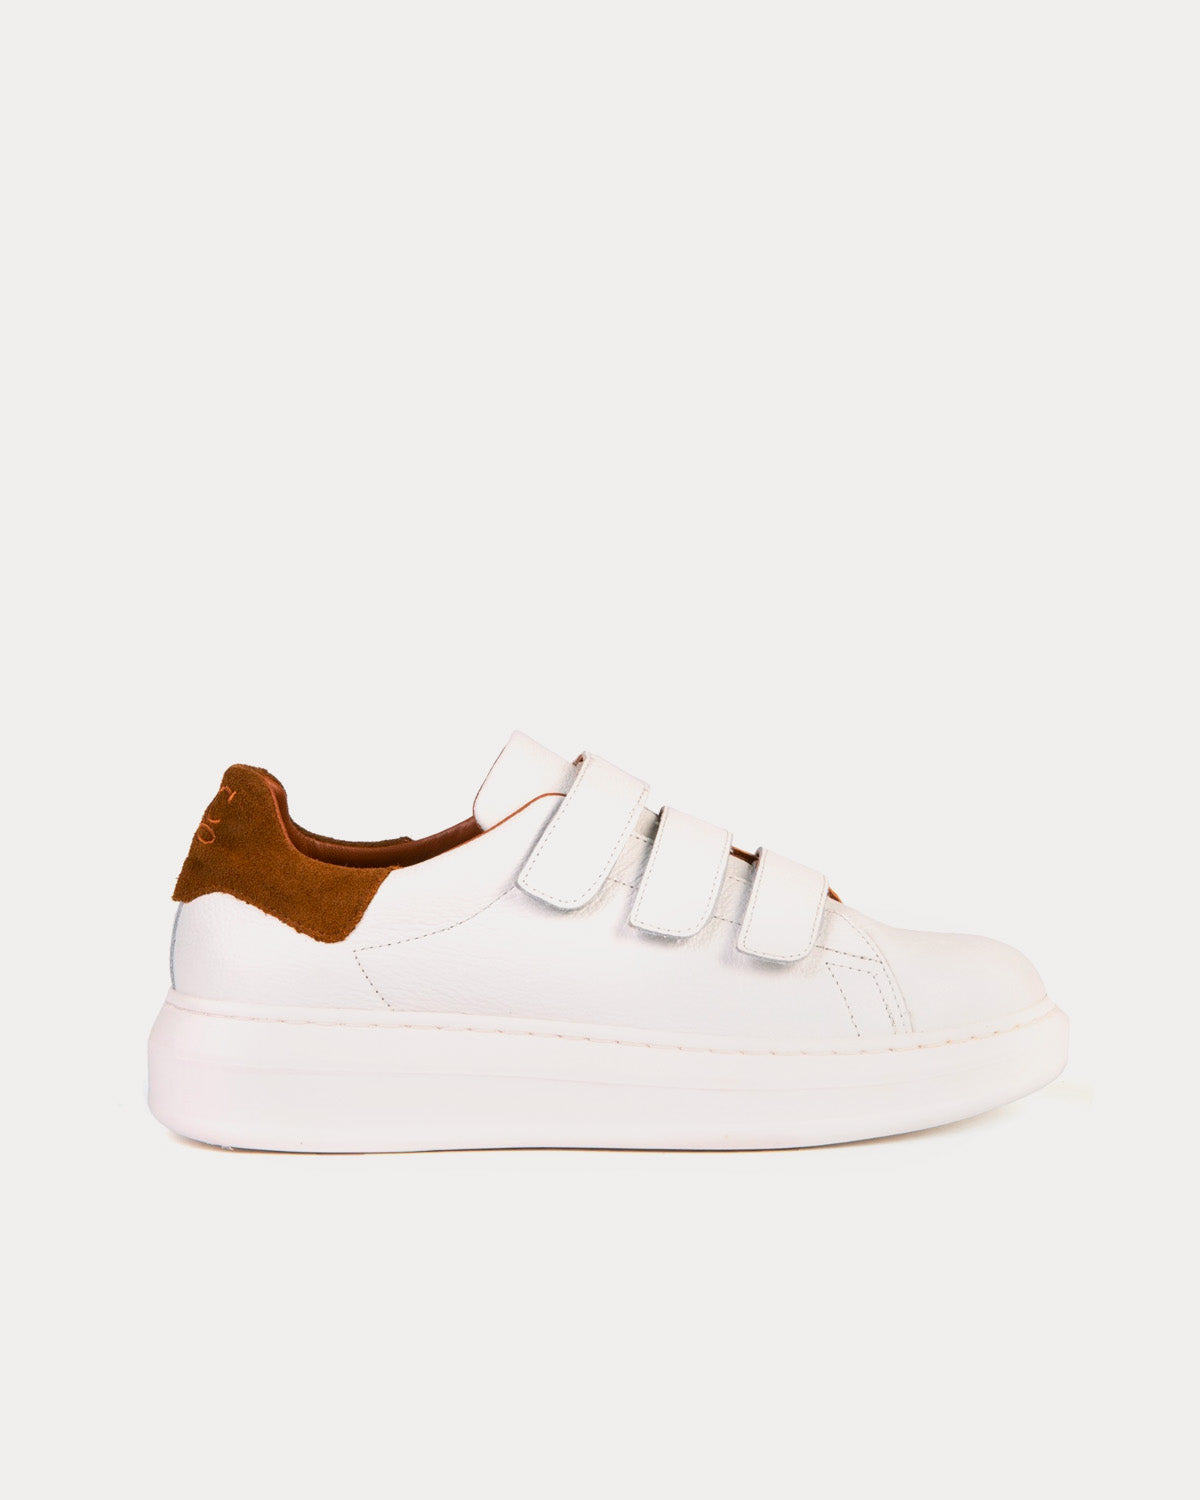 Penelope Chilvers - Rocks Leather White Low Top Sneakers